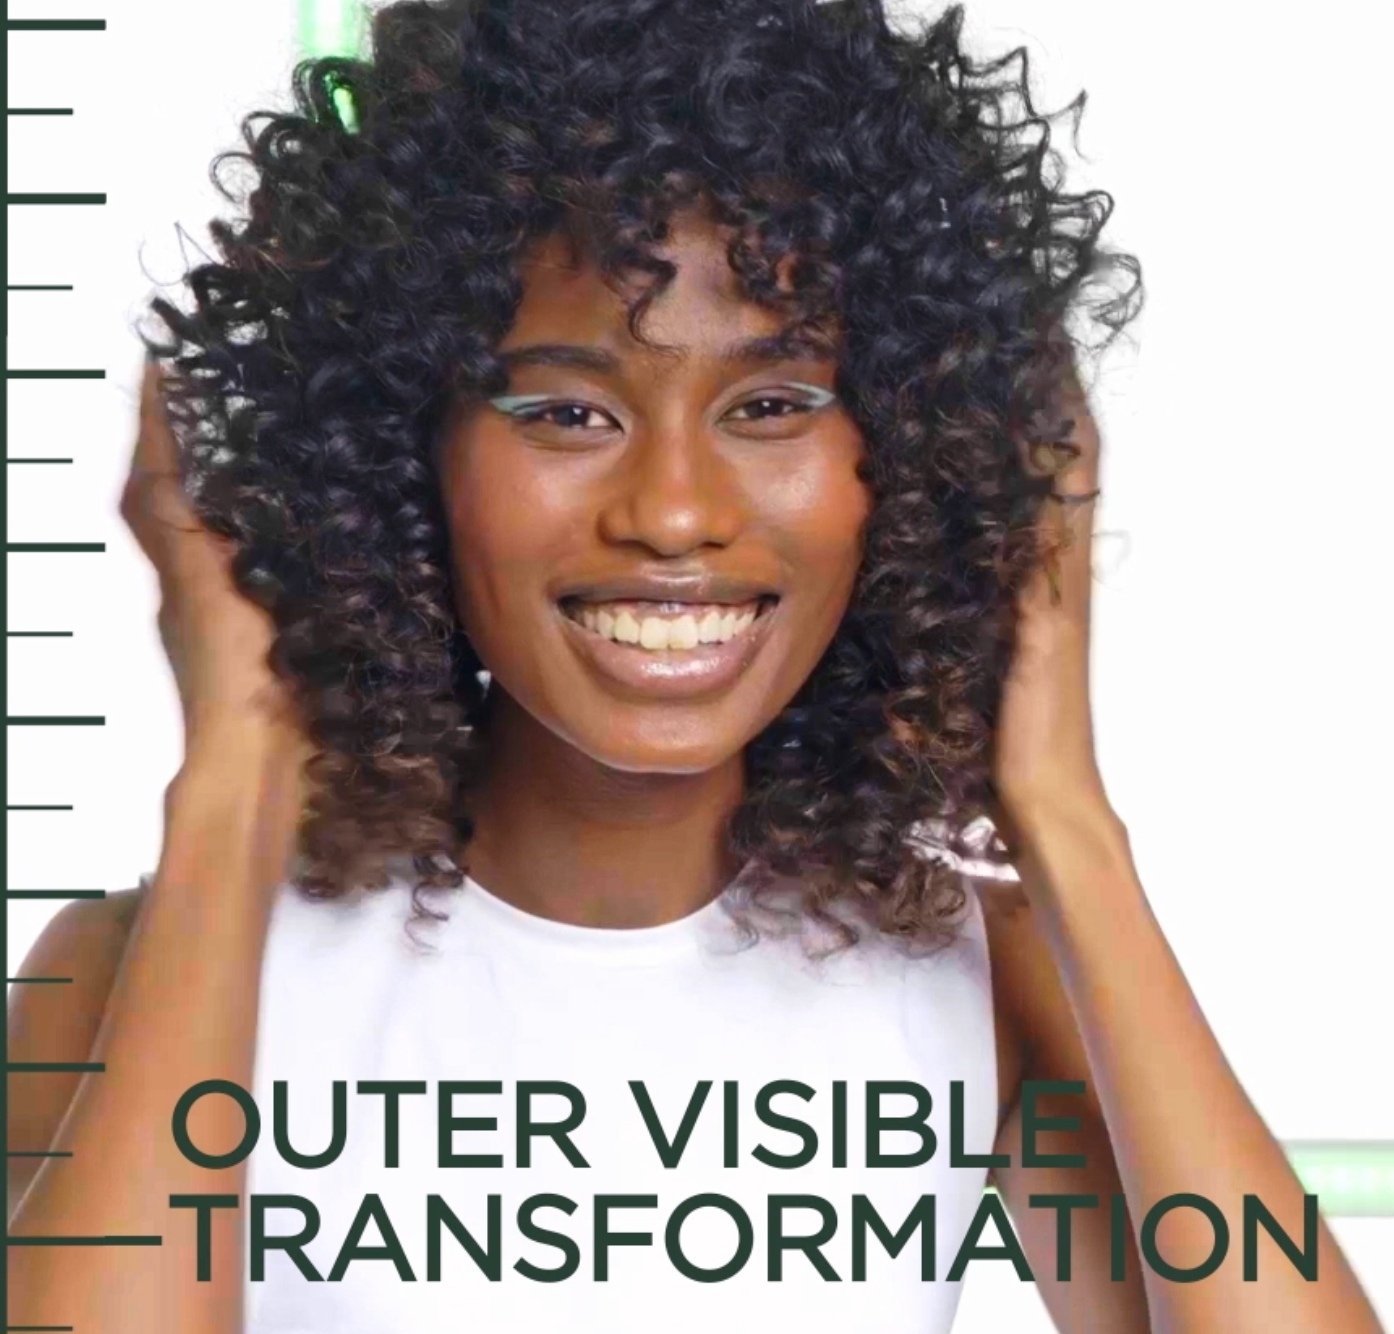 Outer visible transformation